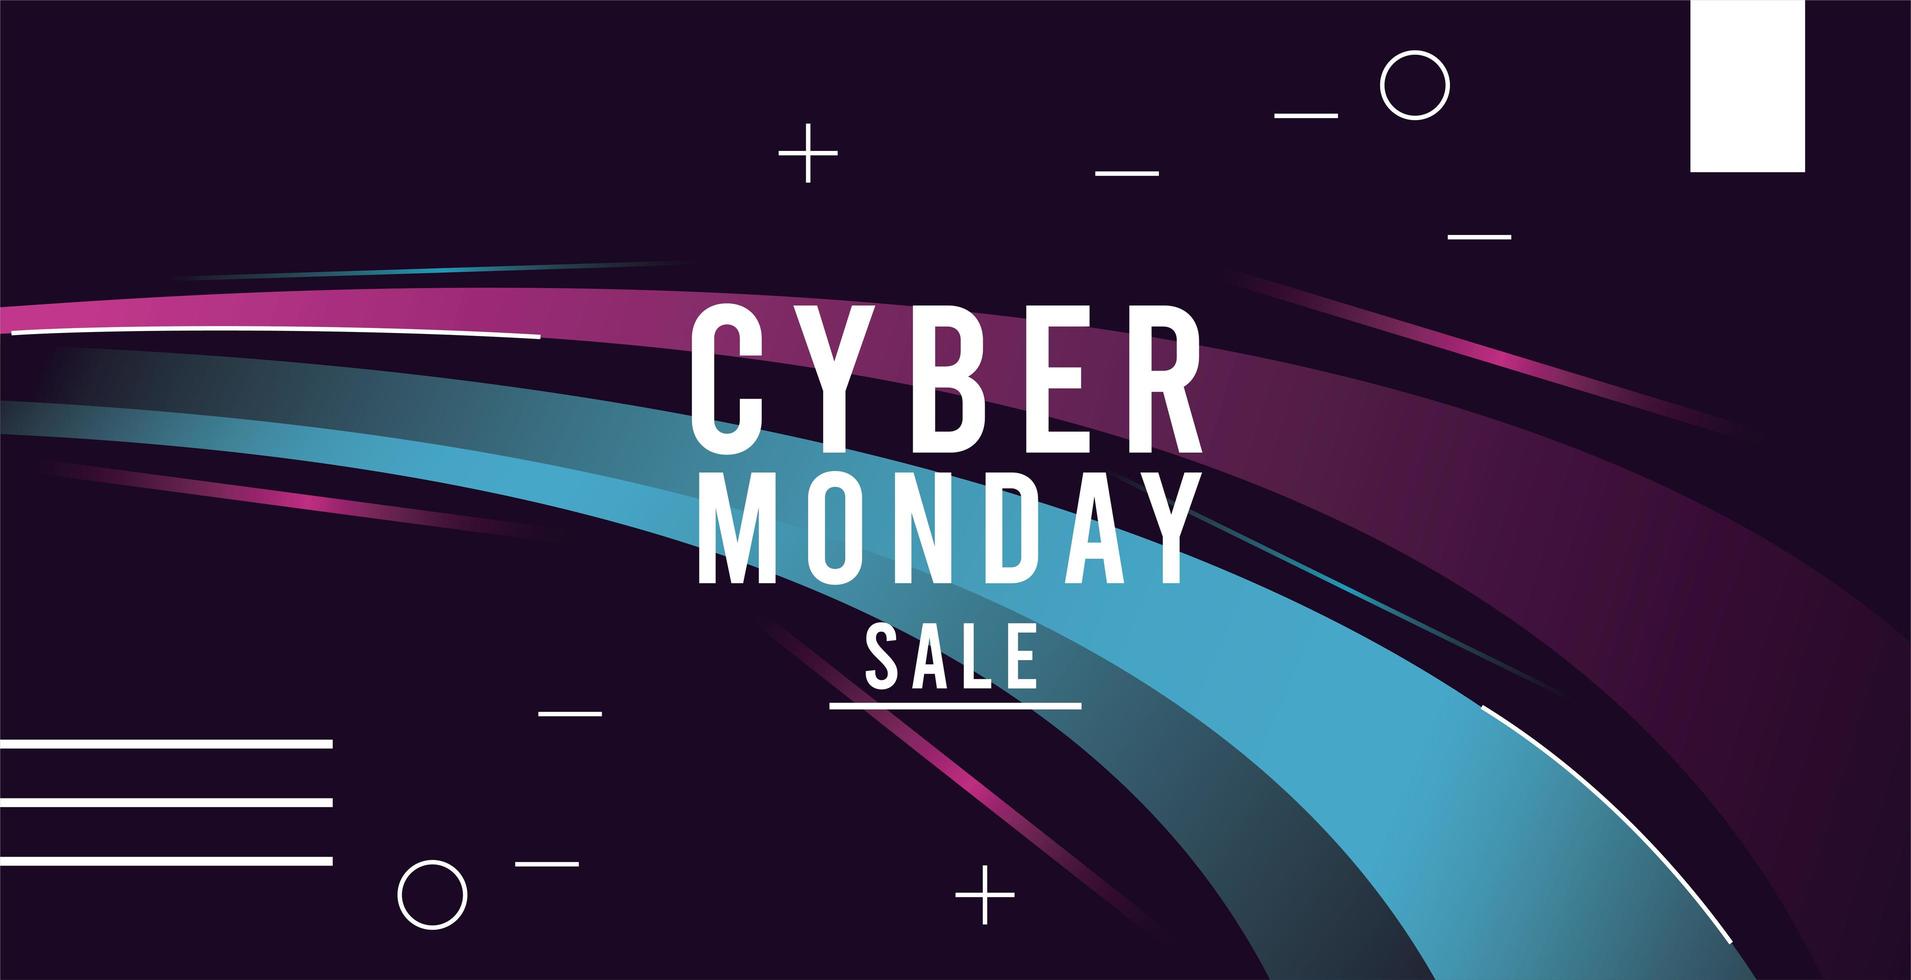 cyber monday sale poster with trails colors blue and pink vector